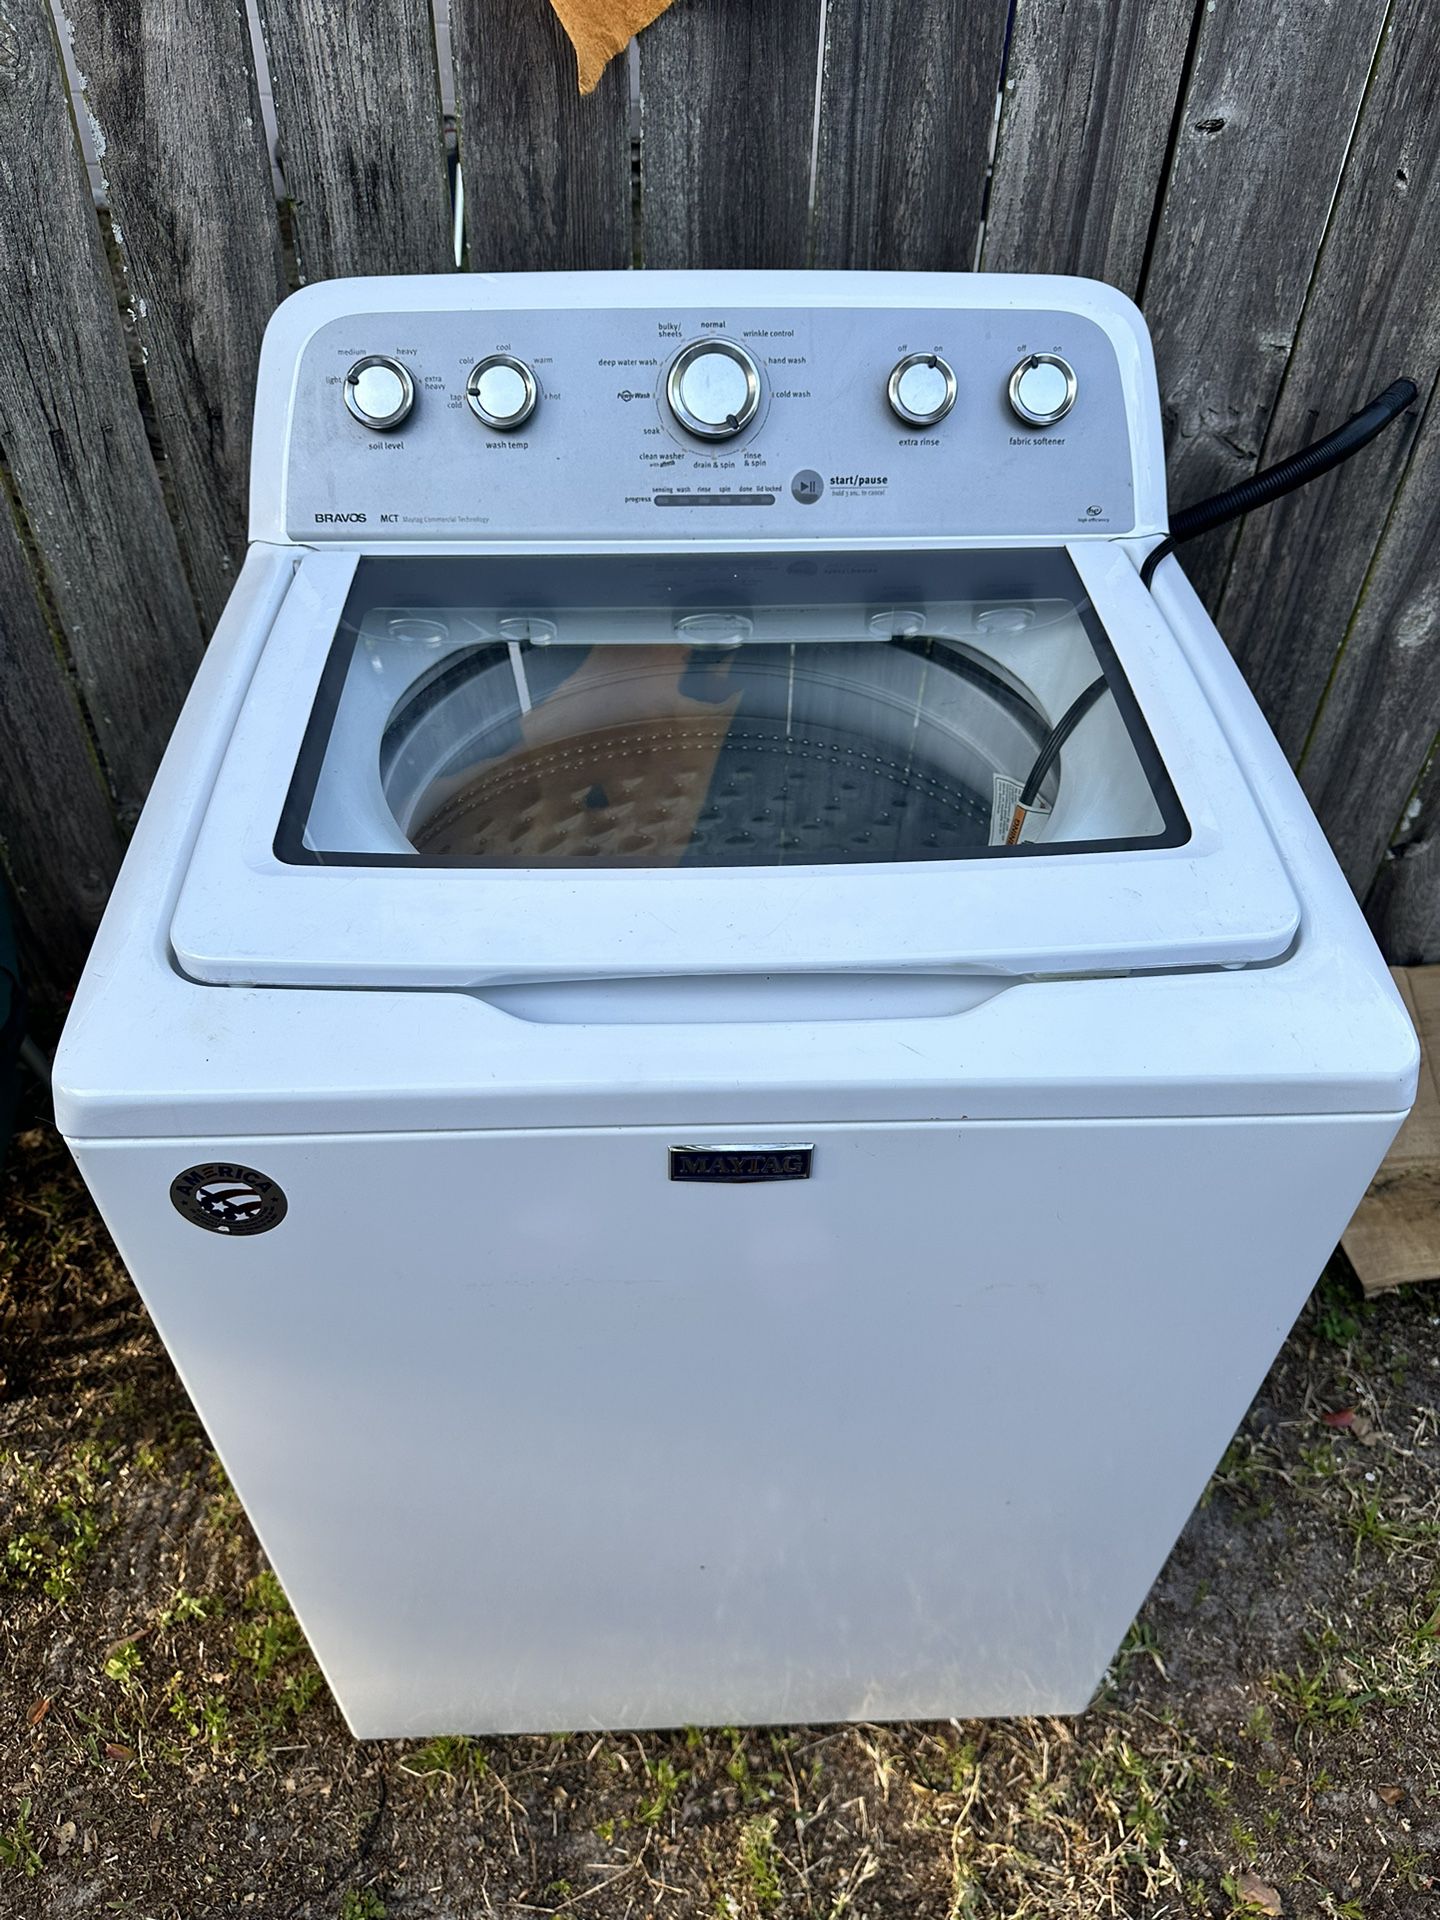 WASHER MAYTAG FOR SALE !!